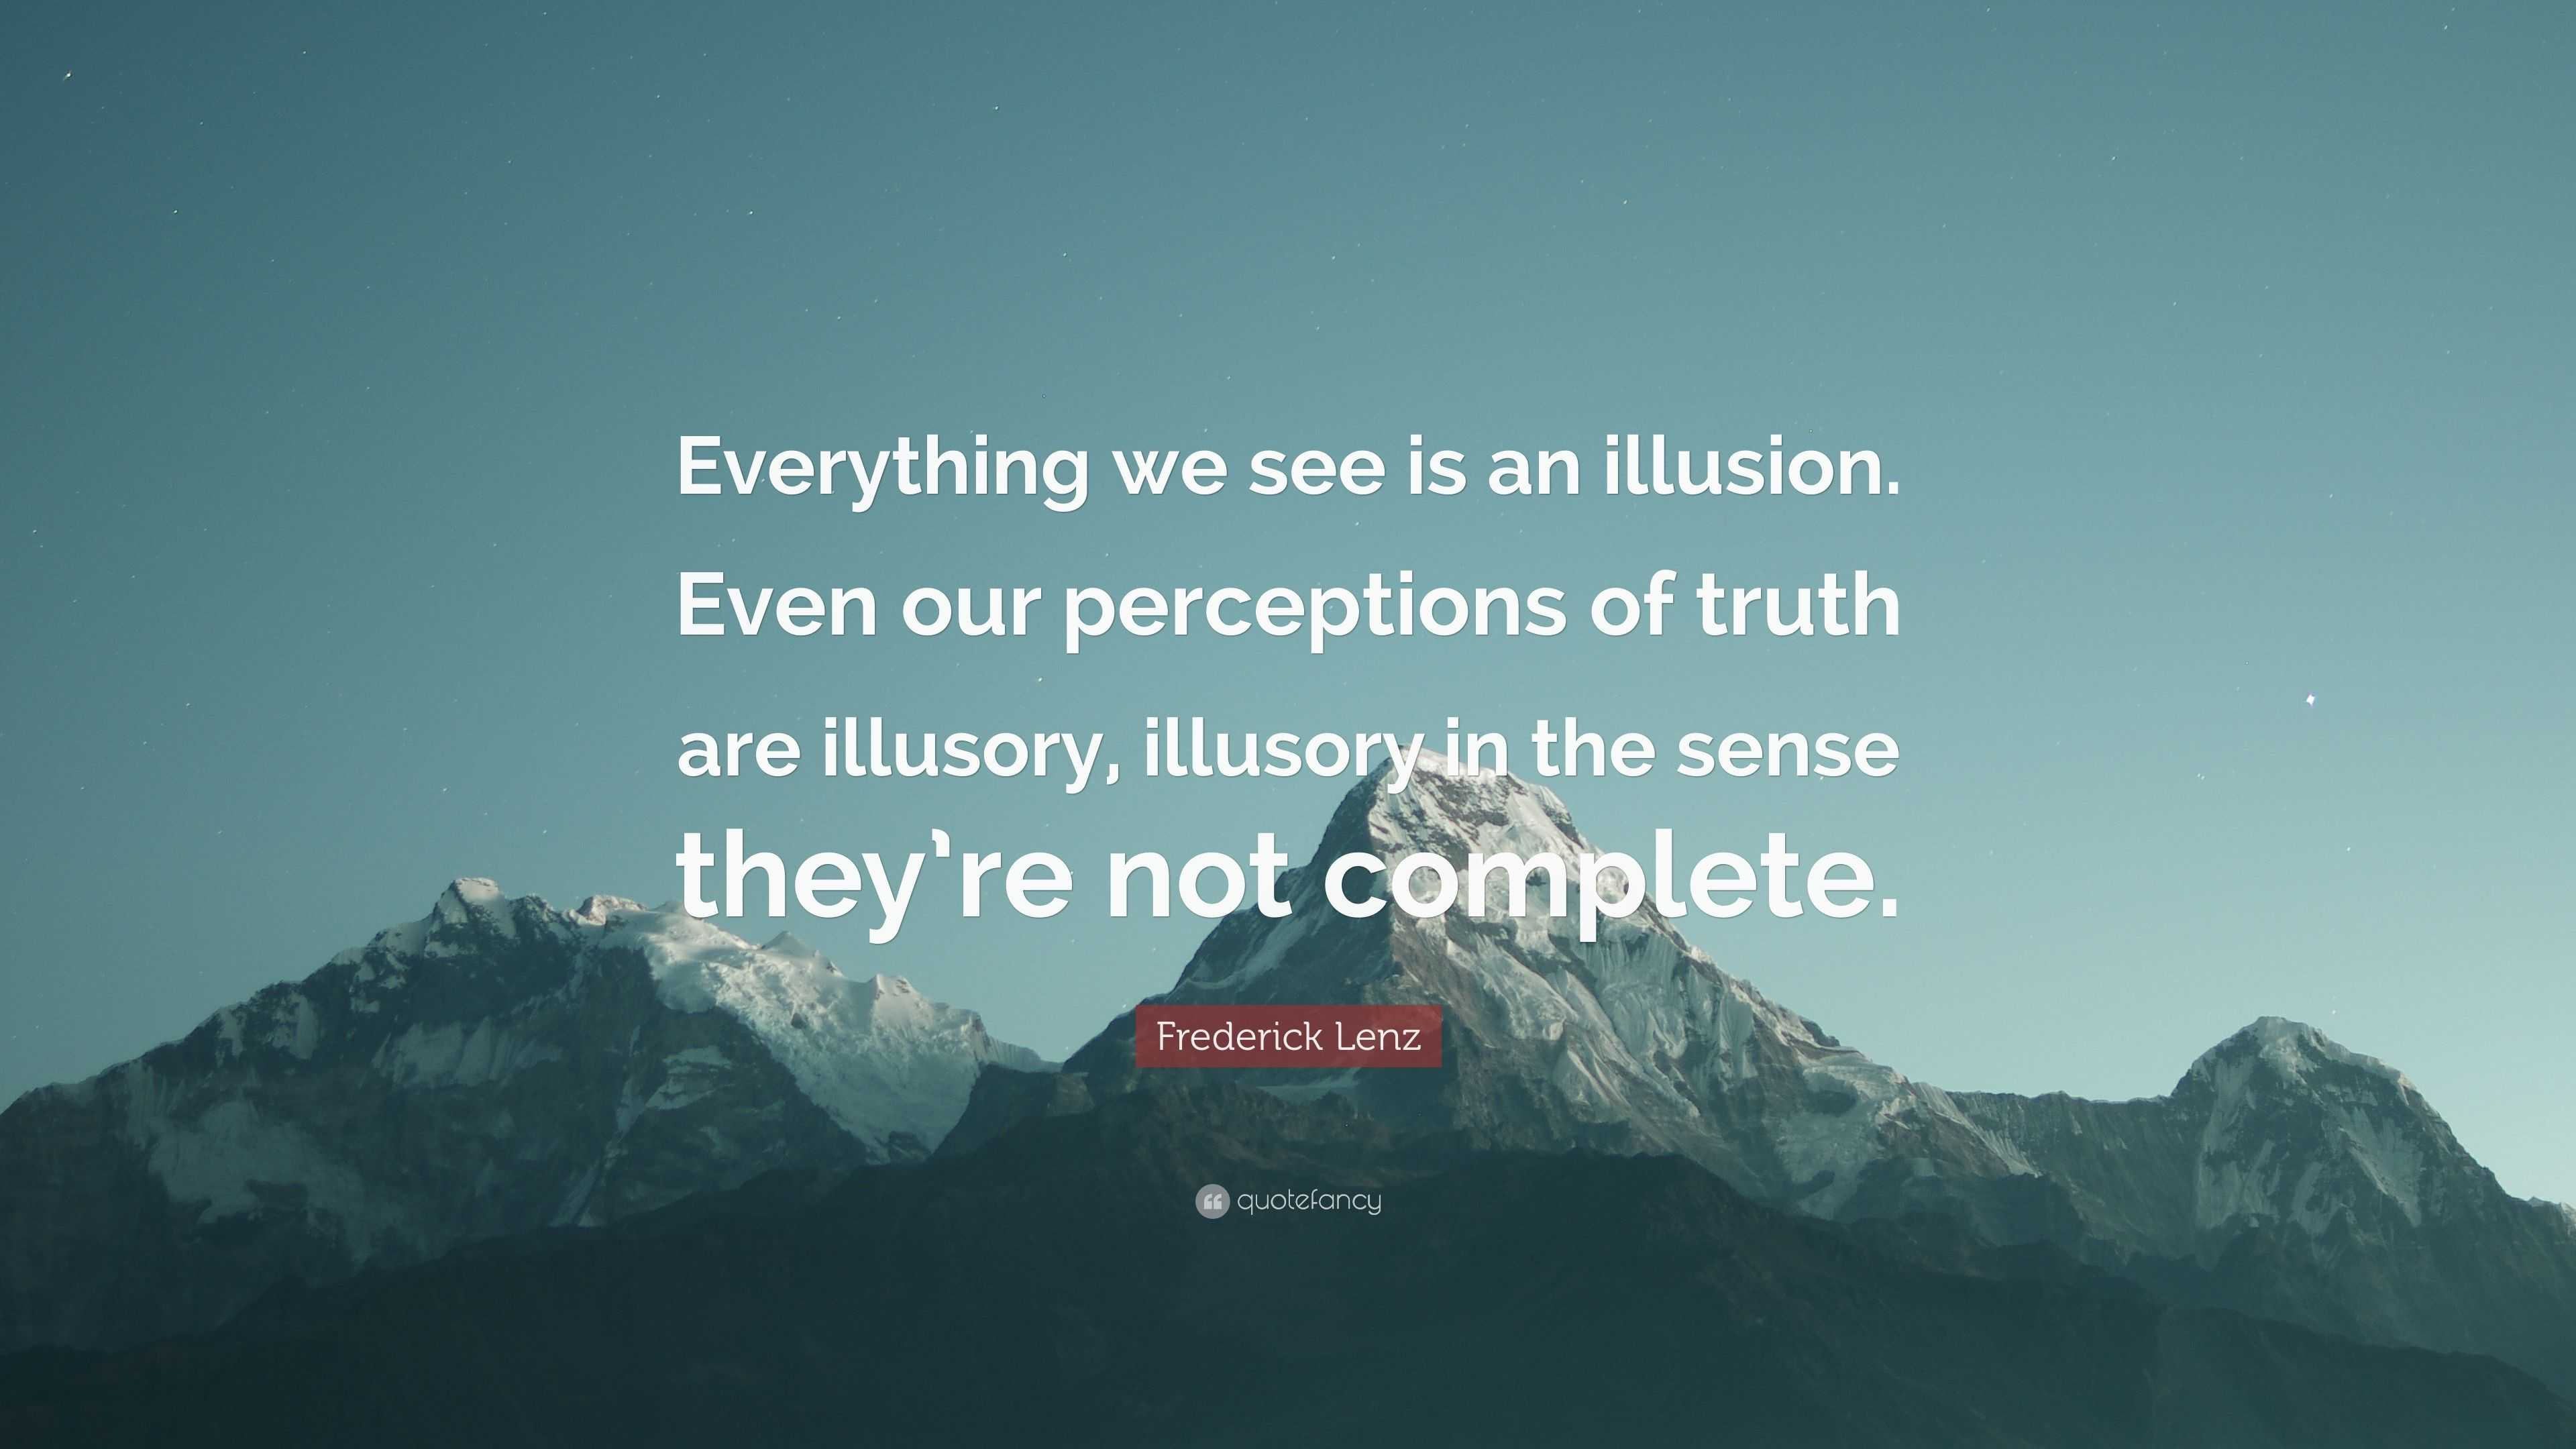 Is everything I see an illusion?